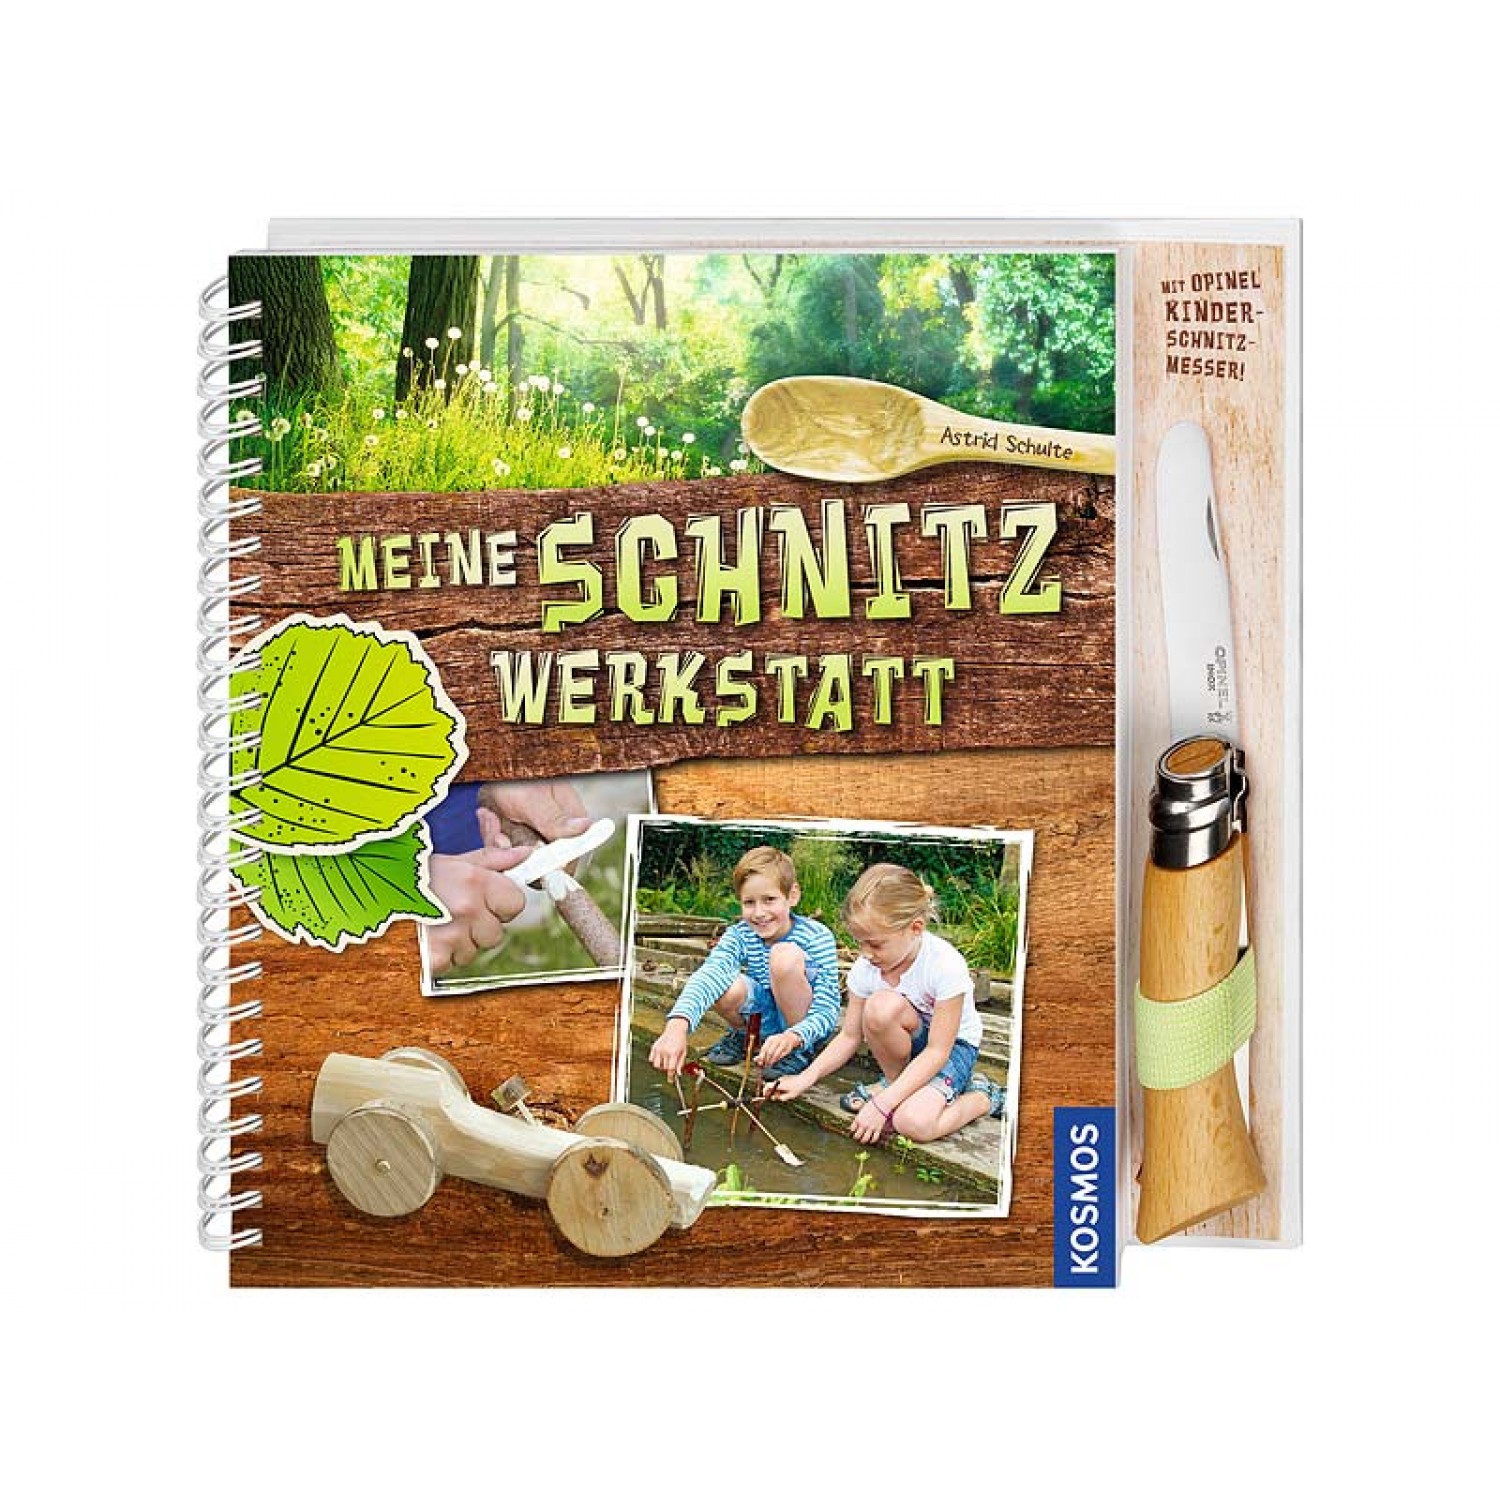 Children’s book “how to carve” (German) & Opinel Knife